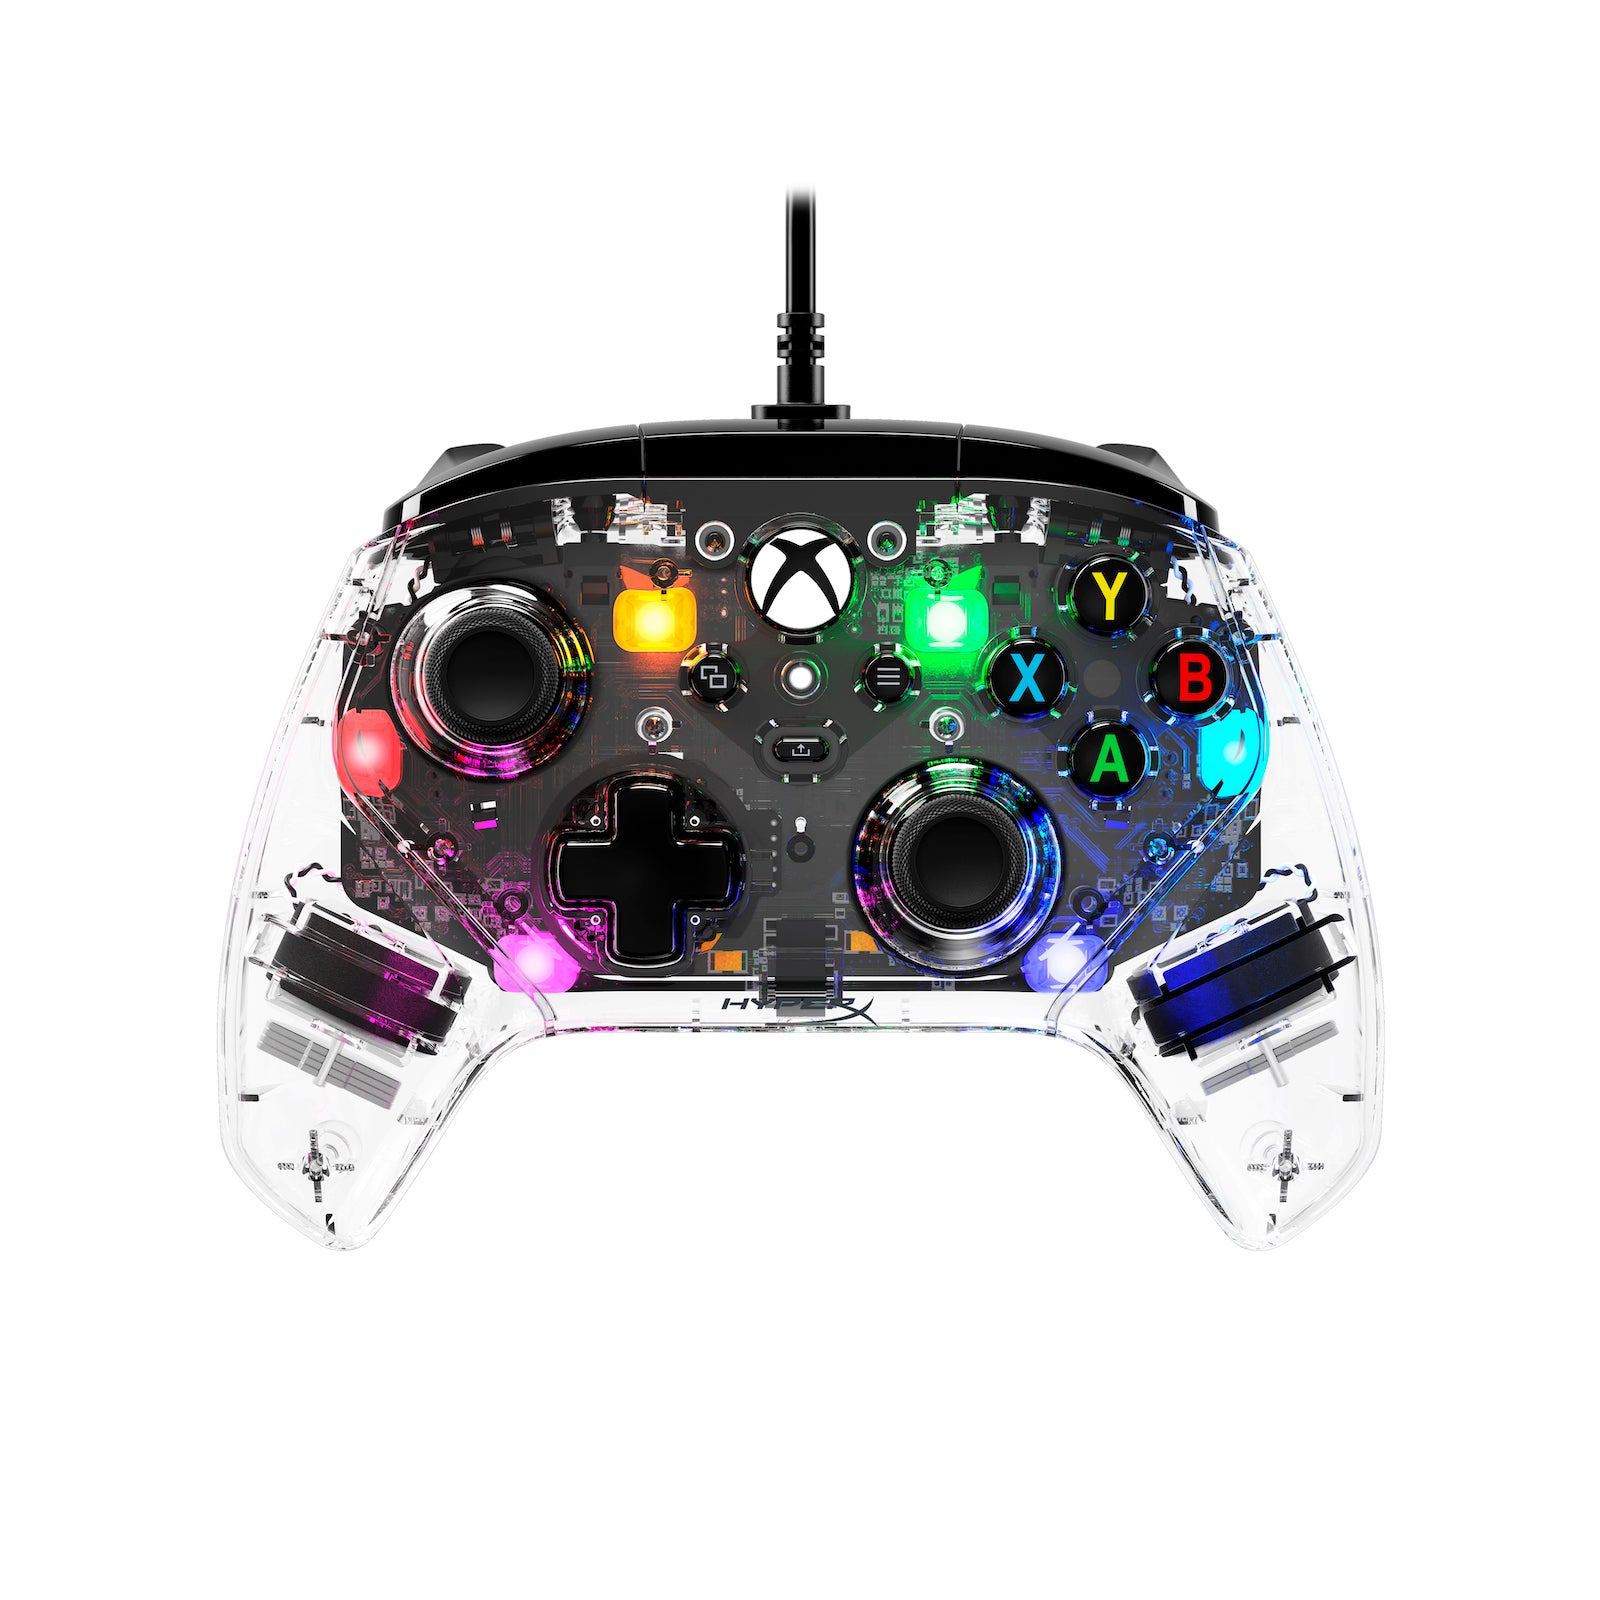 Get this Xbox wired controller with customizable RGB lighting for